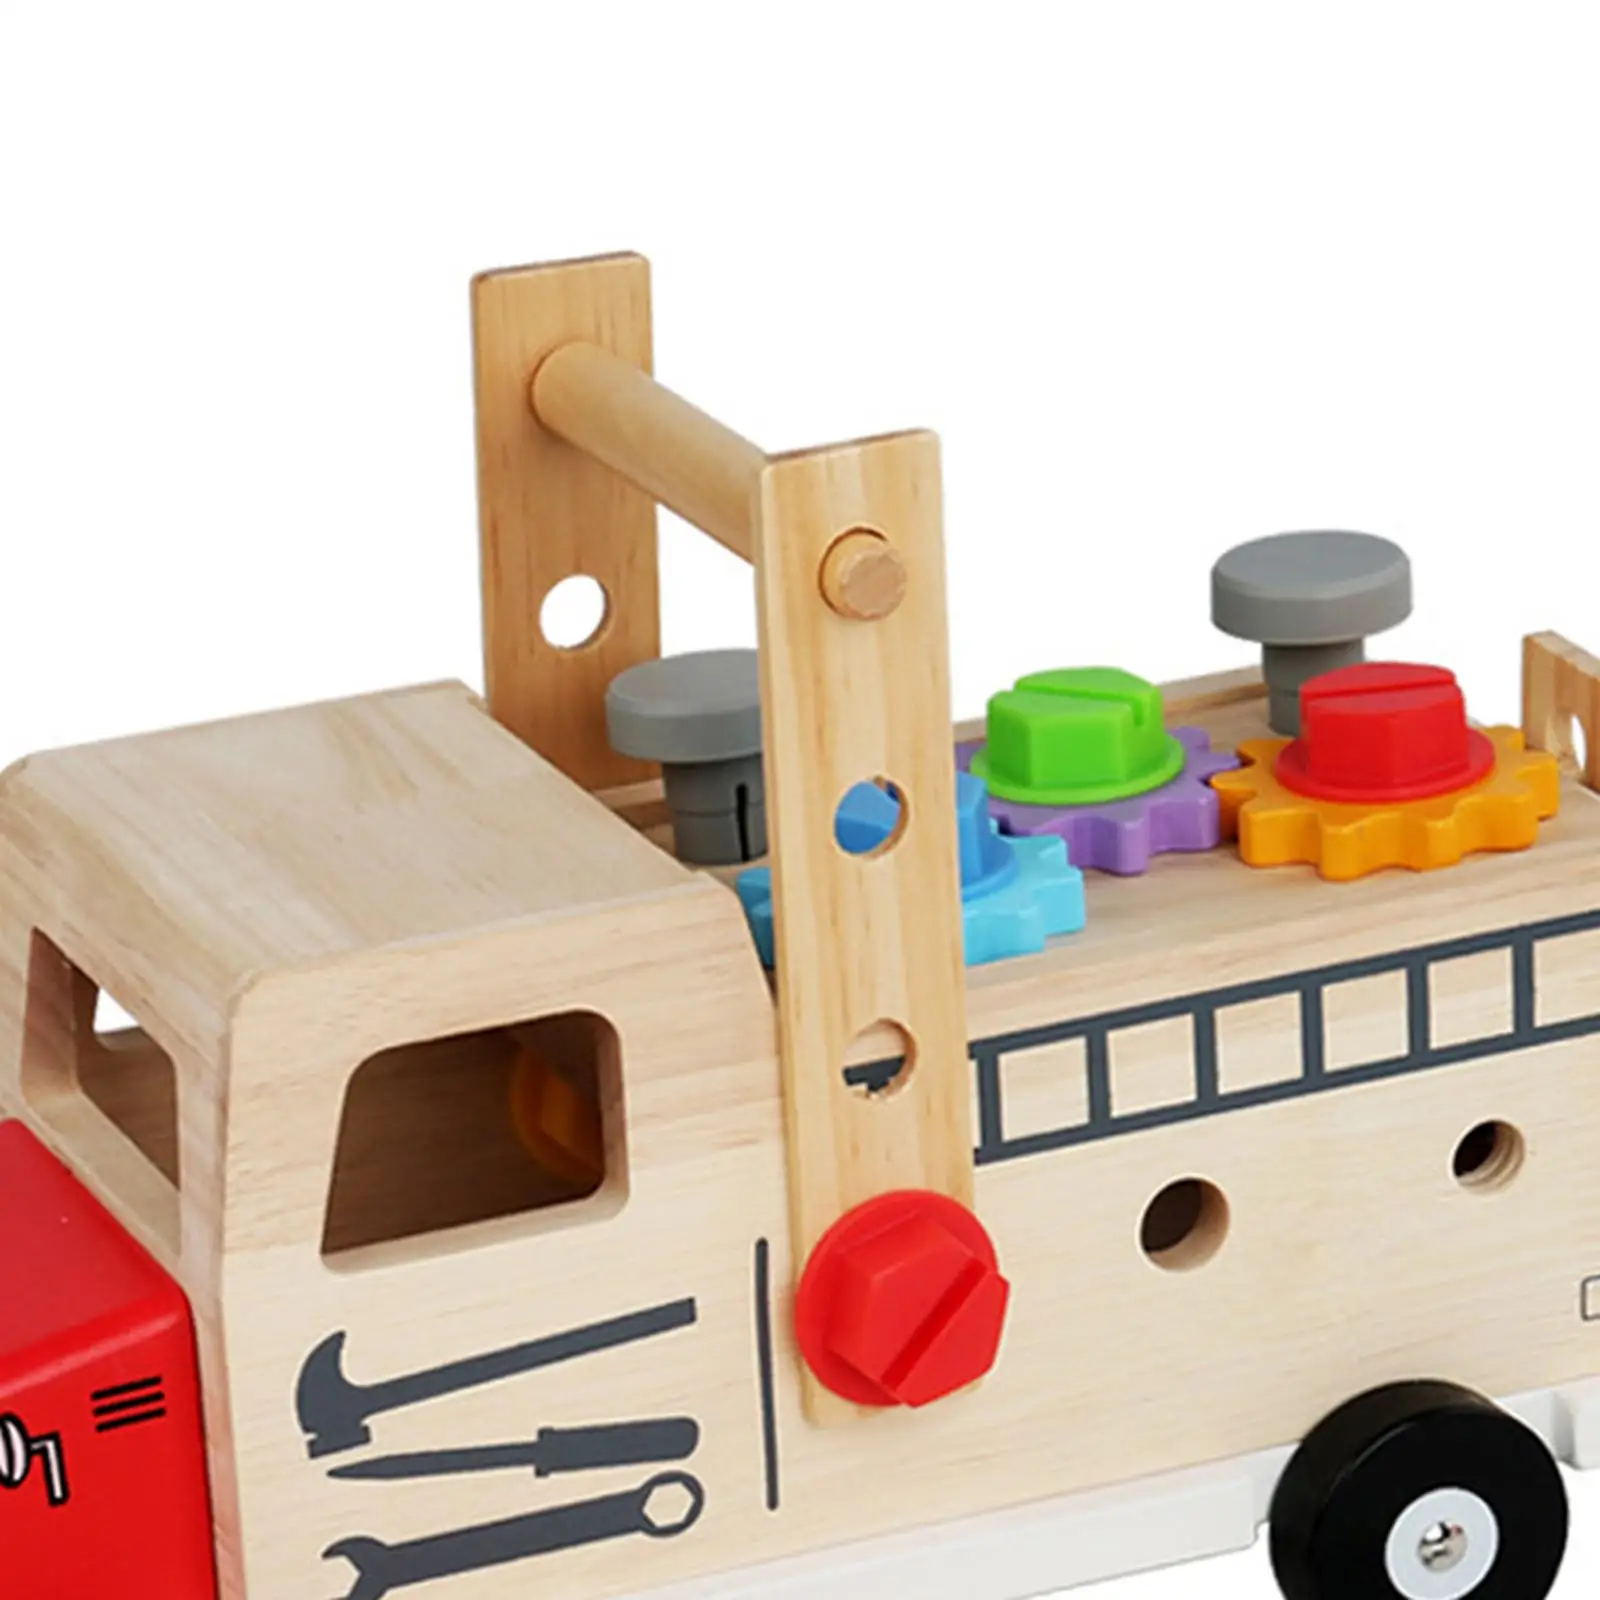 Construction Toy Stem Creative Montessori Role Play Wood Kids Tool Set for Children 3 4 5 6 Years Old Boys Girls Xmas Present